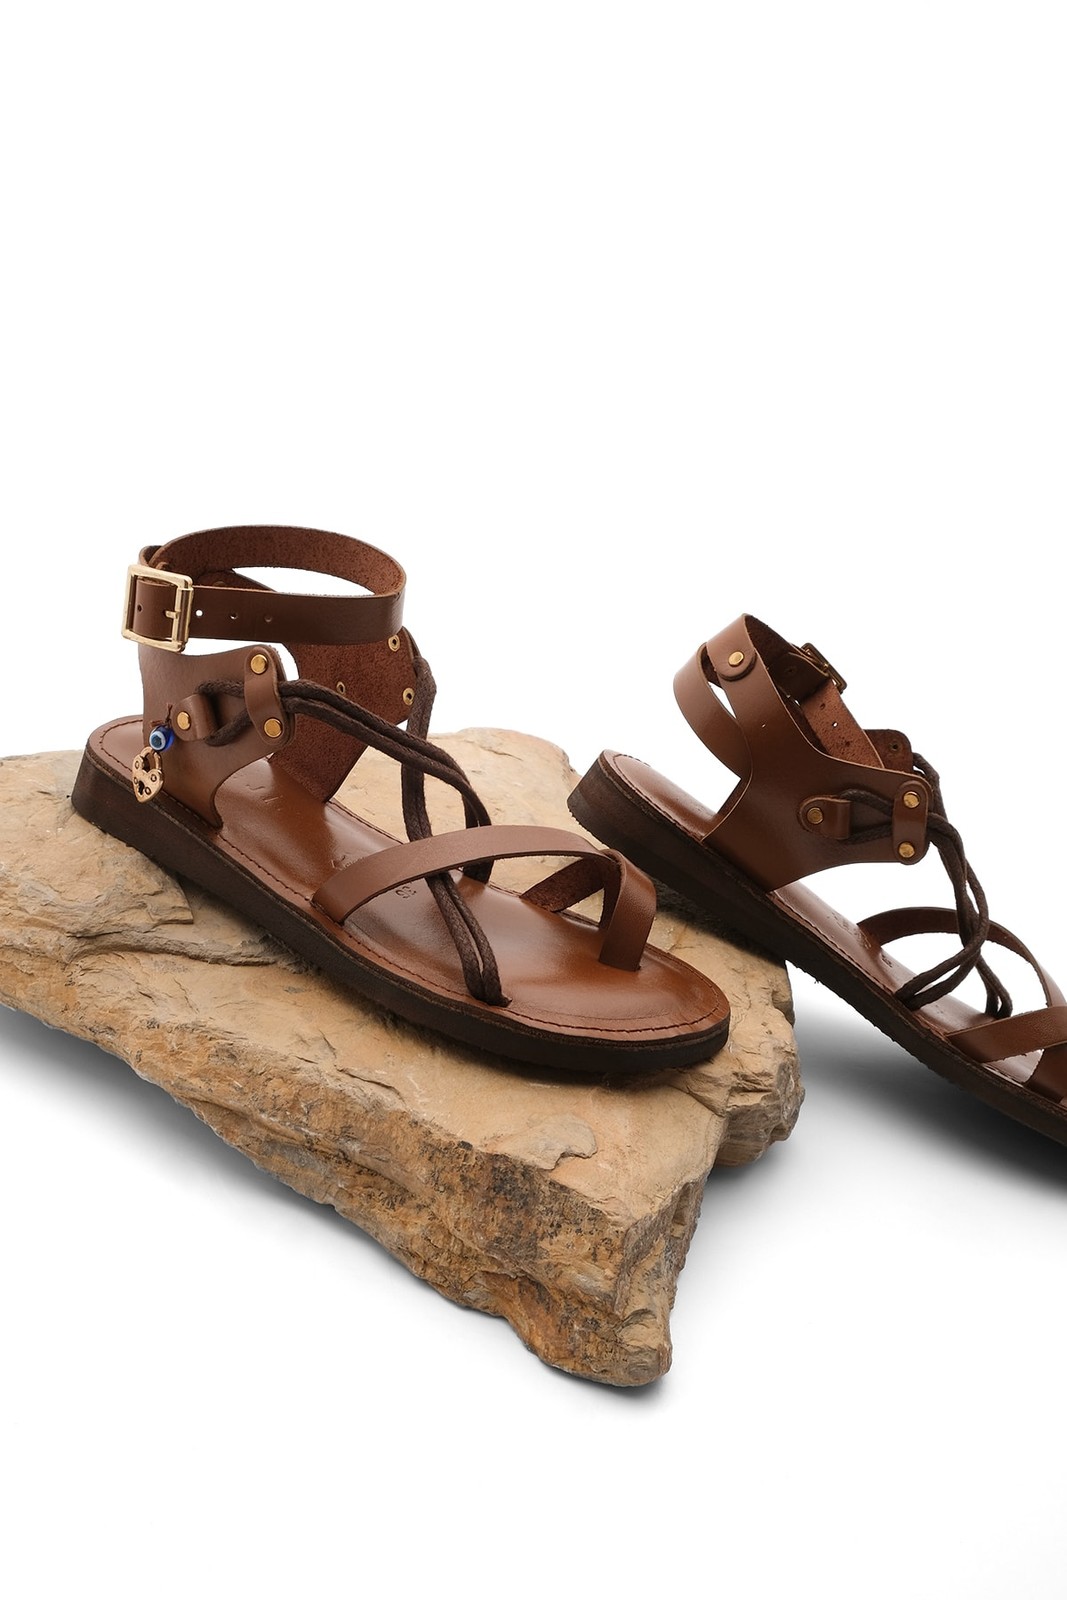 Marjin Women's Genuine Leather Accessoried Eva Sole With Crossed Threads Detail Daily Sandals Rivade Tan.